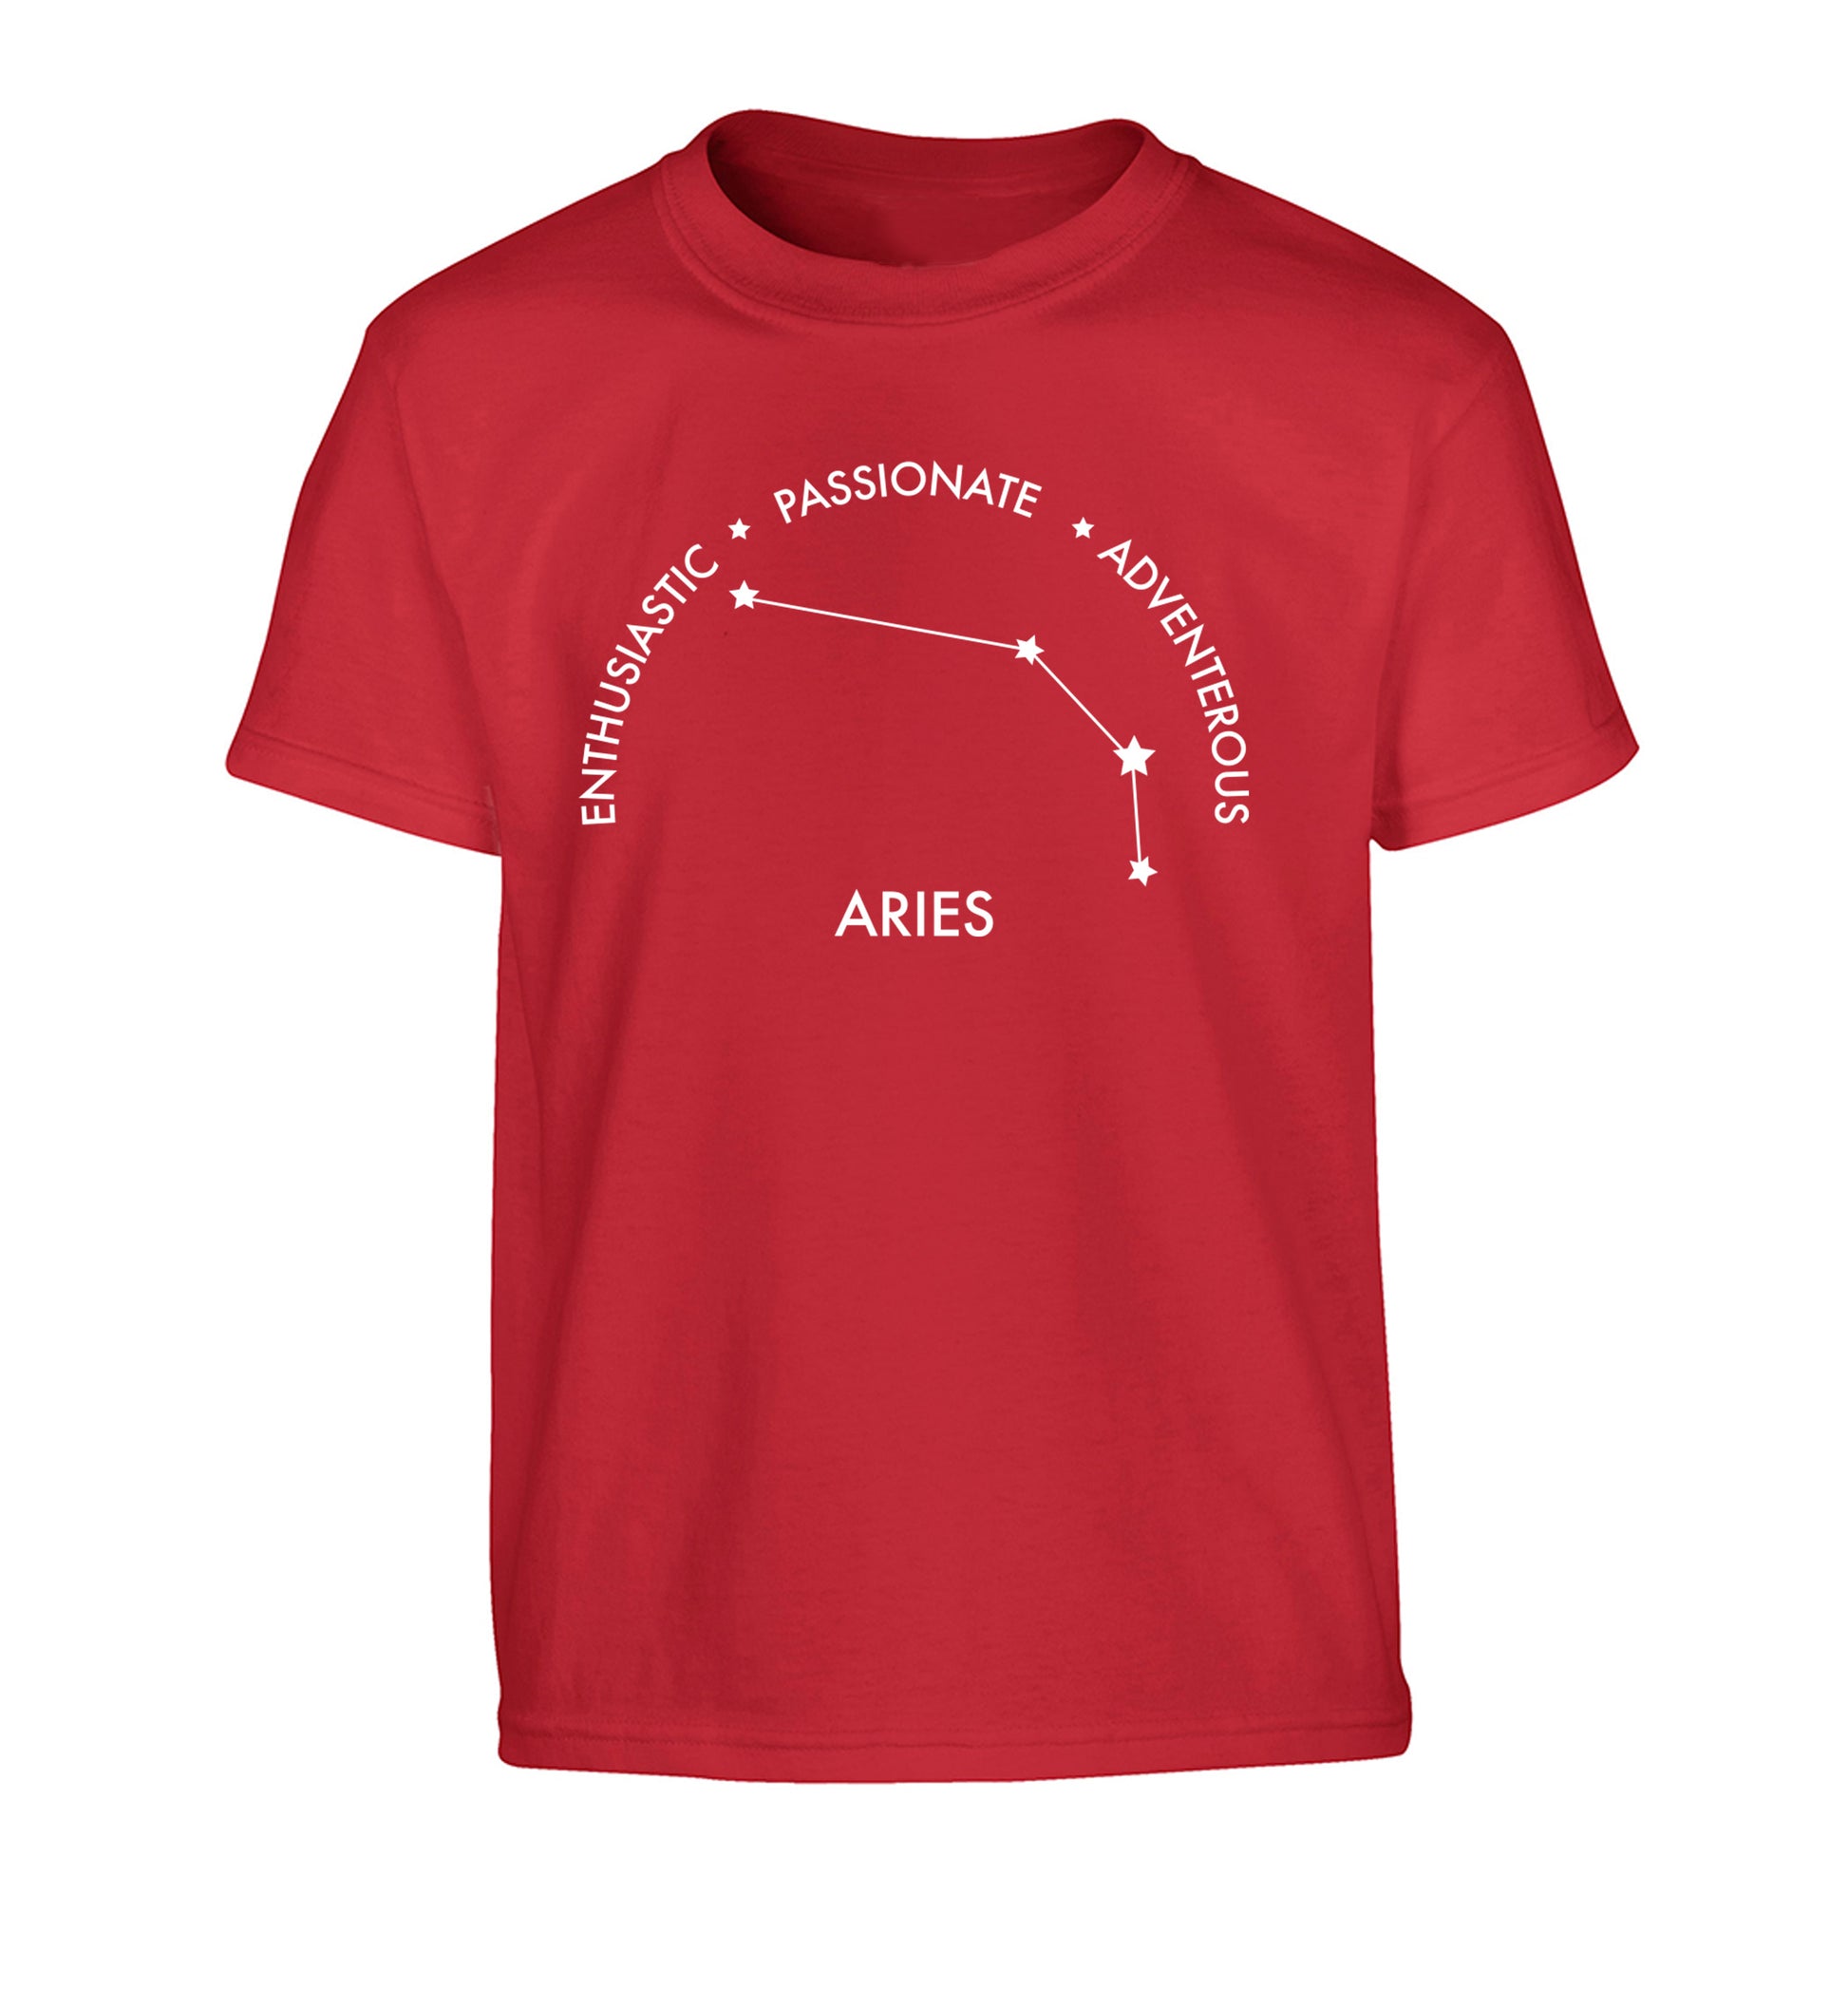 Aries enthusiastic | passionate | adventerous Children's red Tshirt 12-13 Years